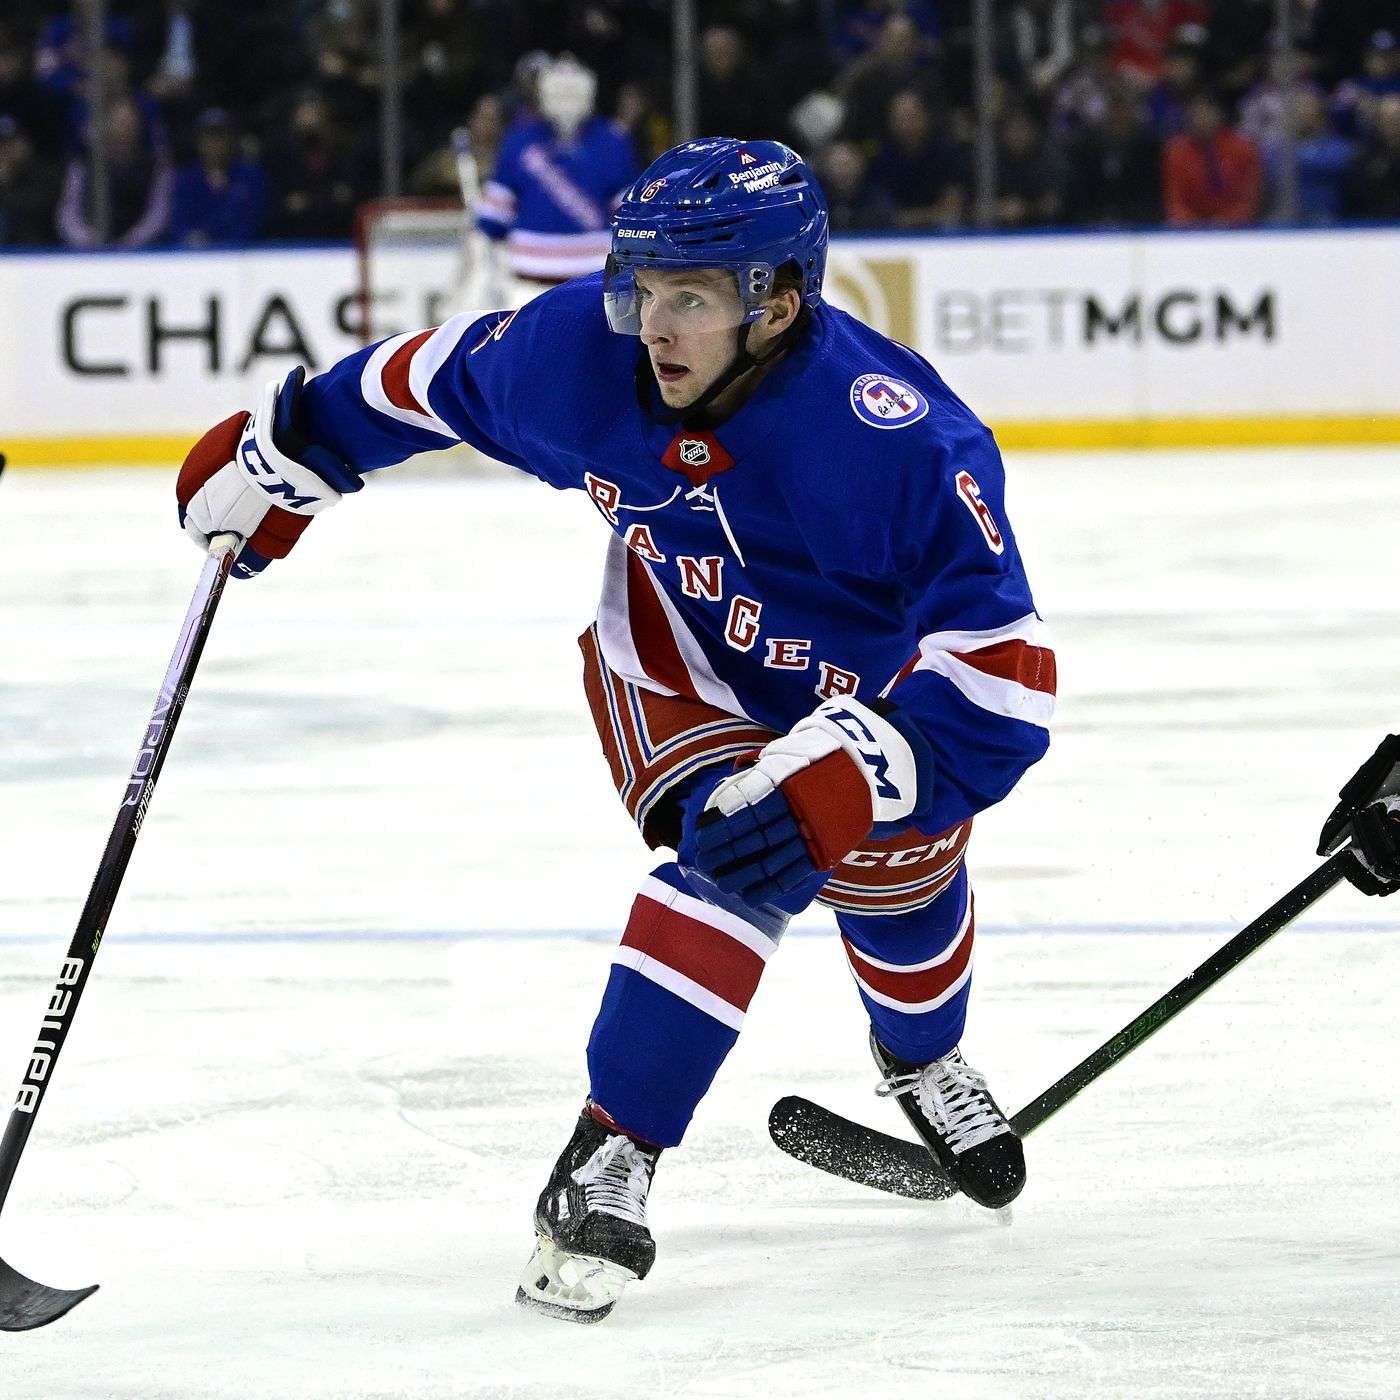 Rangers Host Montreal with Key Players Expected to be Rested